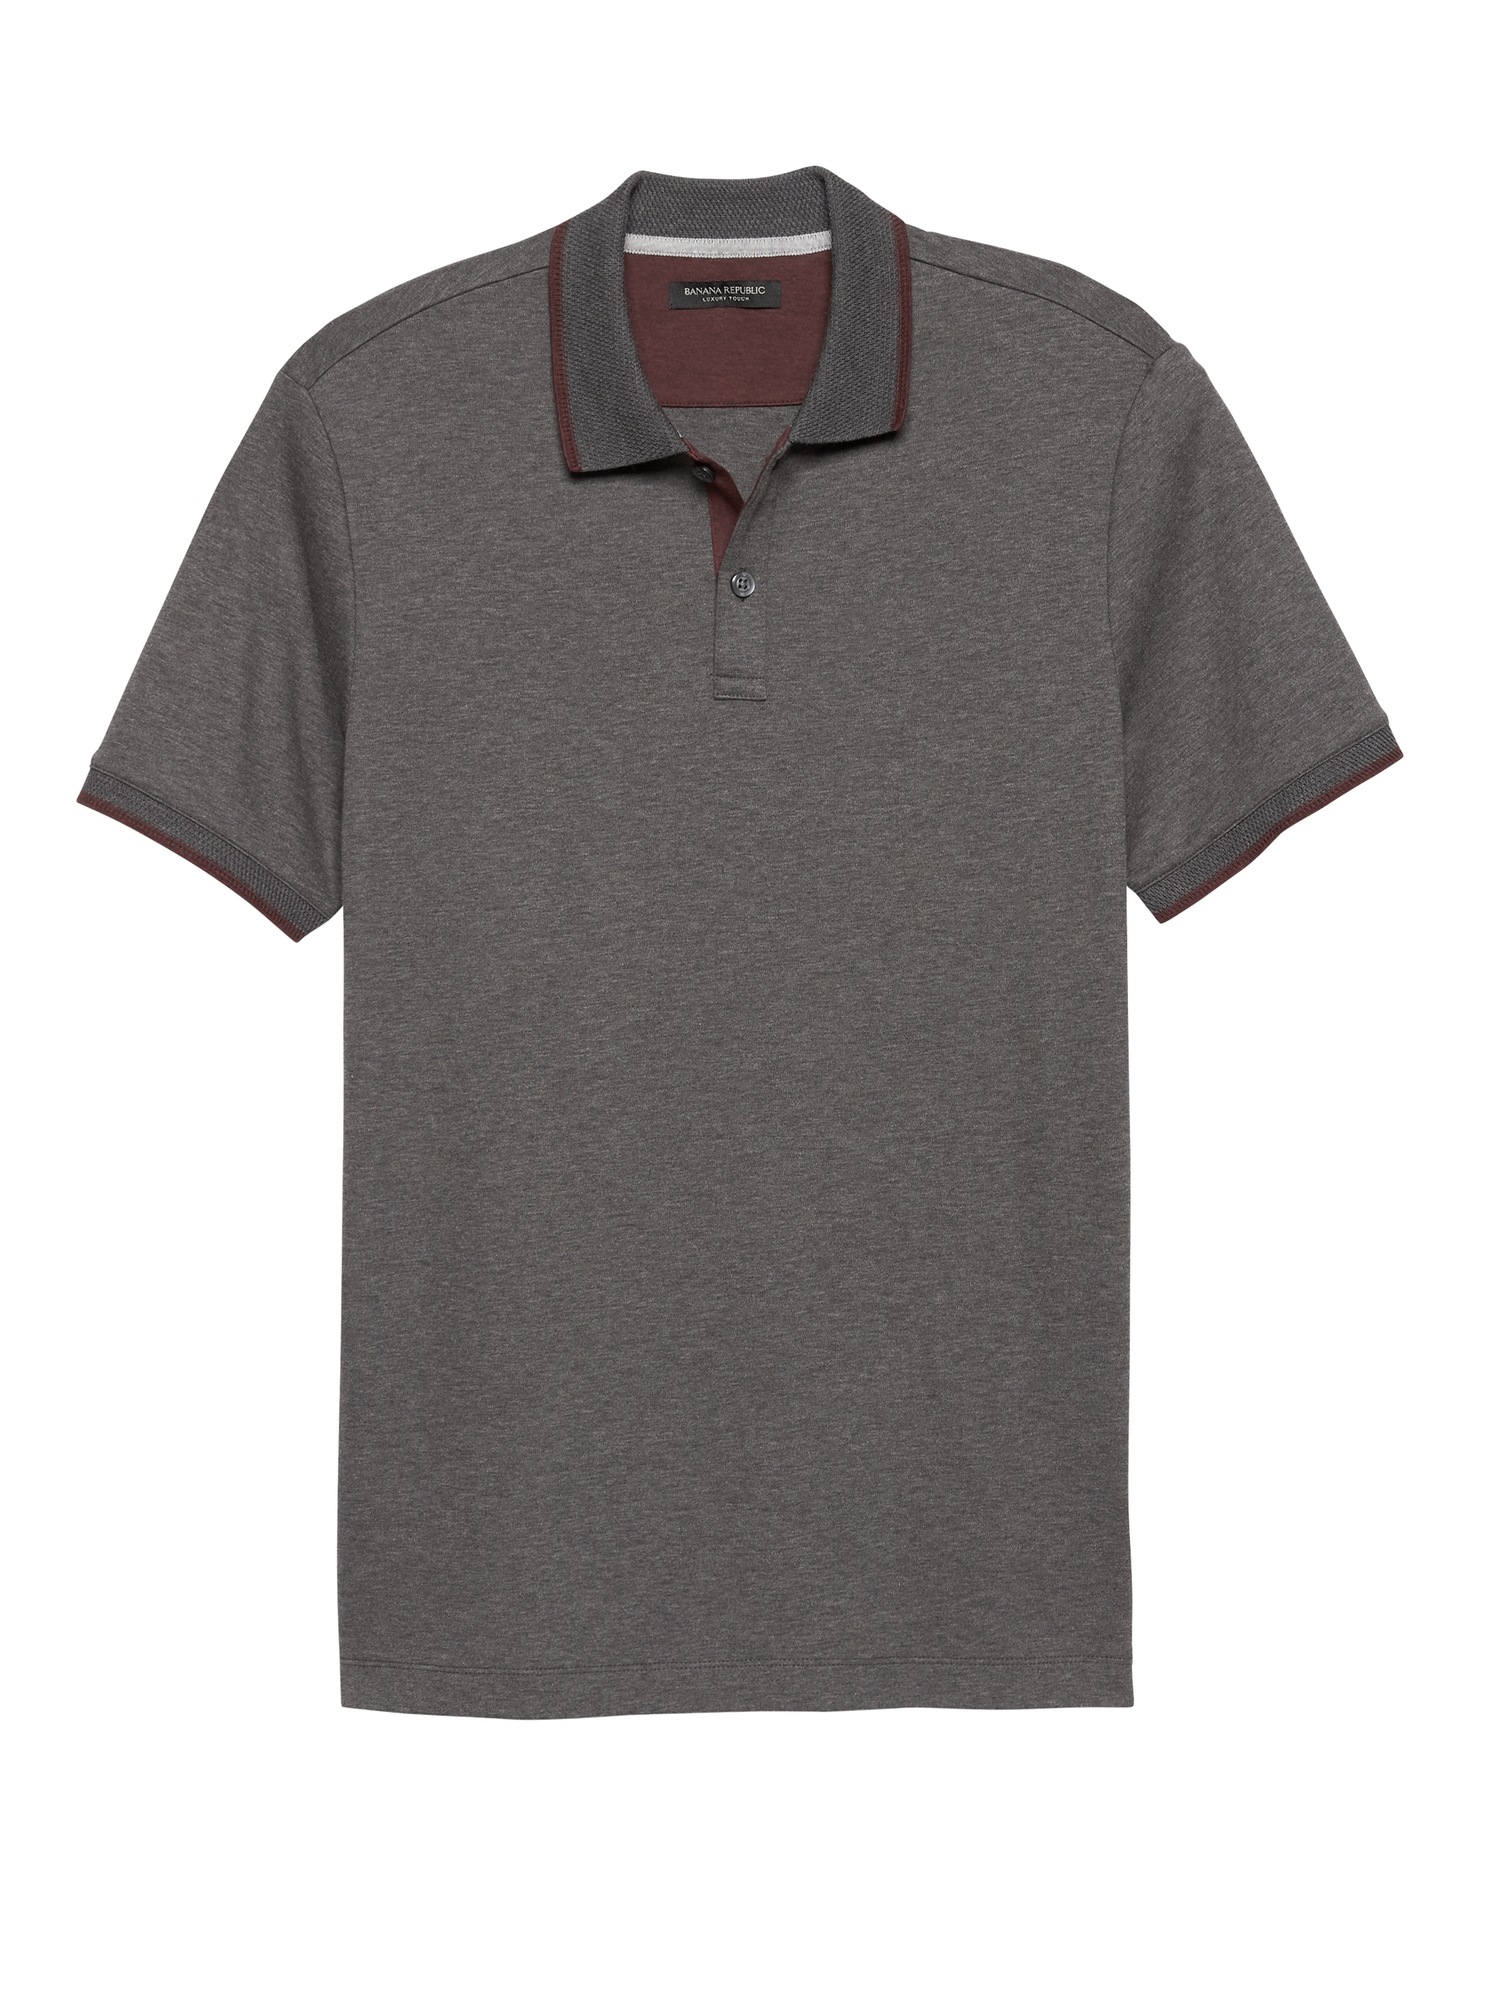 Luxury-Touch Jacquard Collar Polo